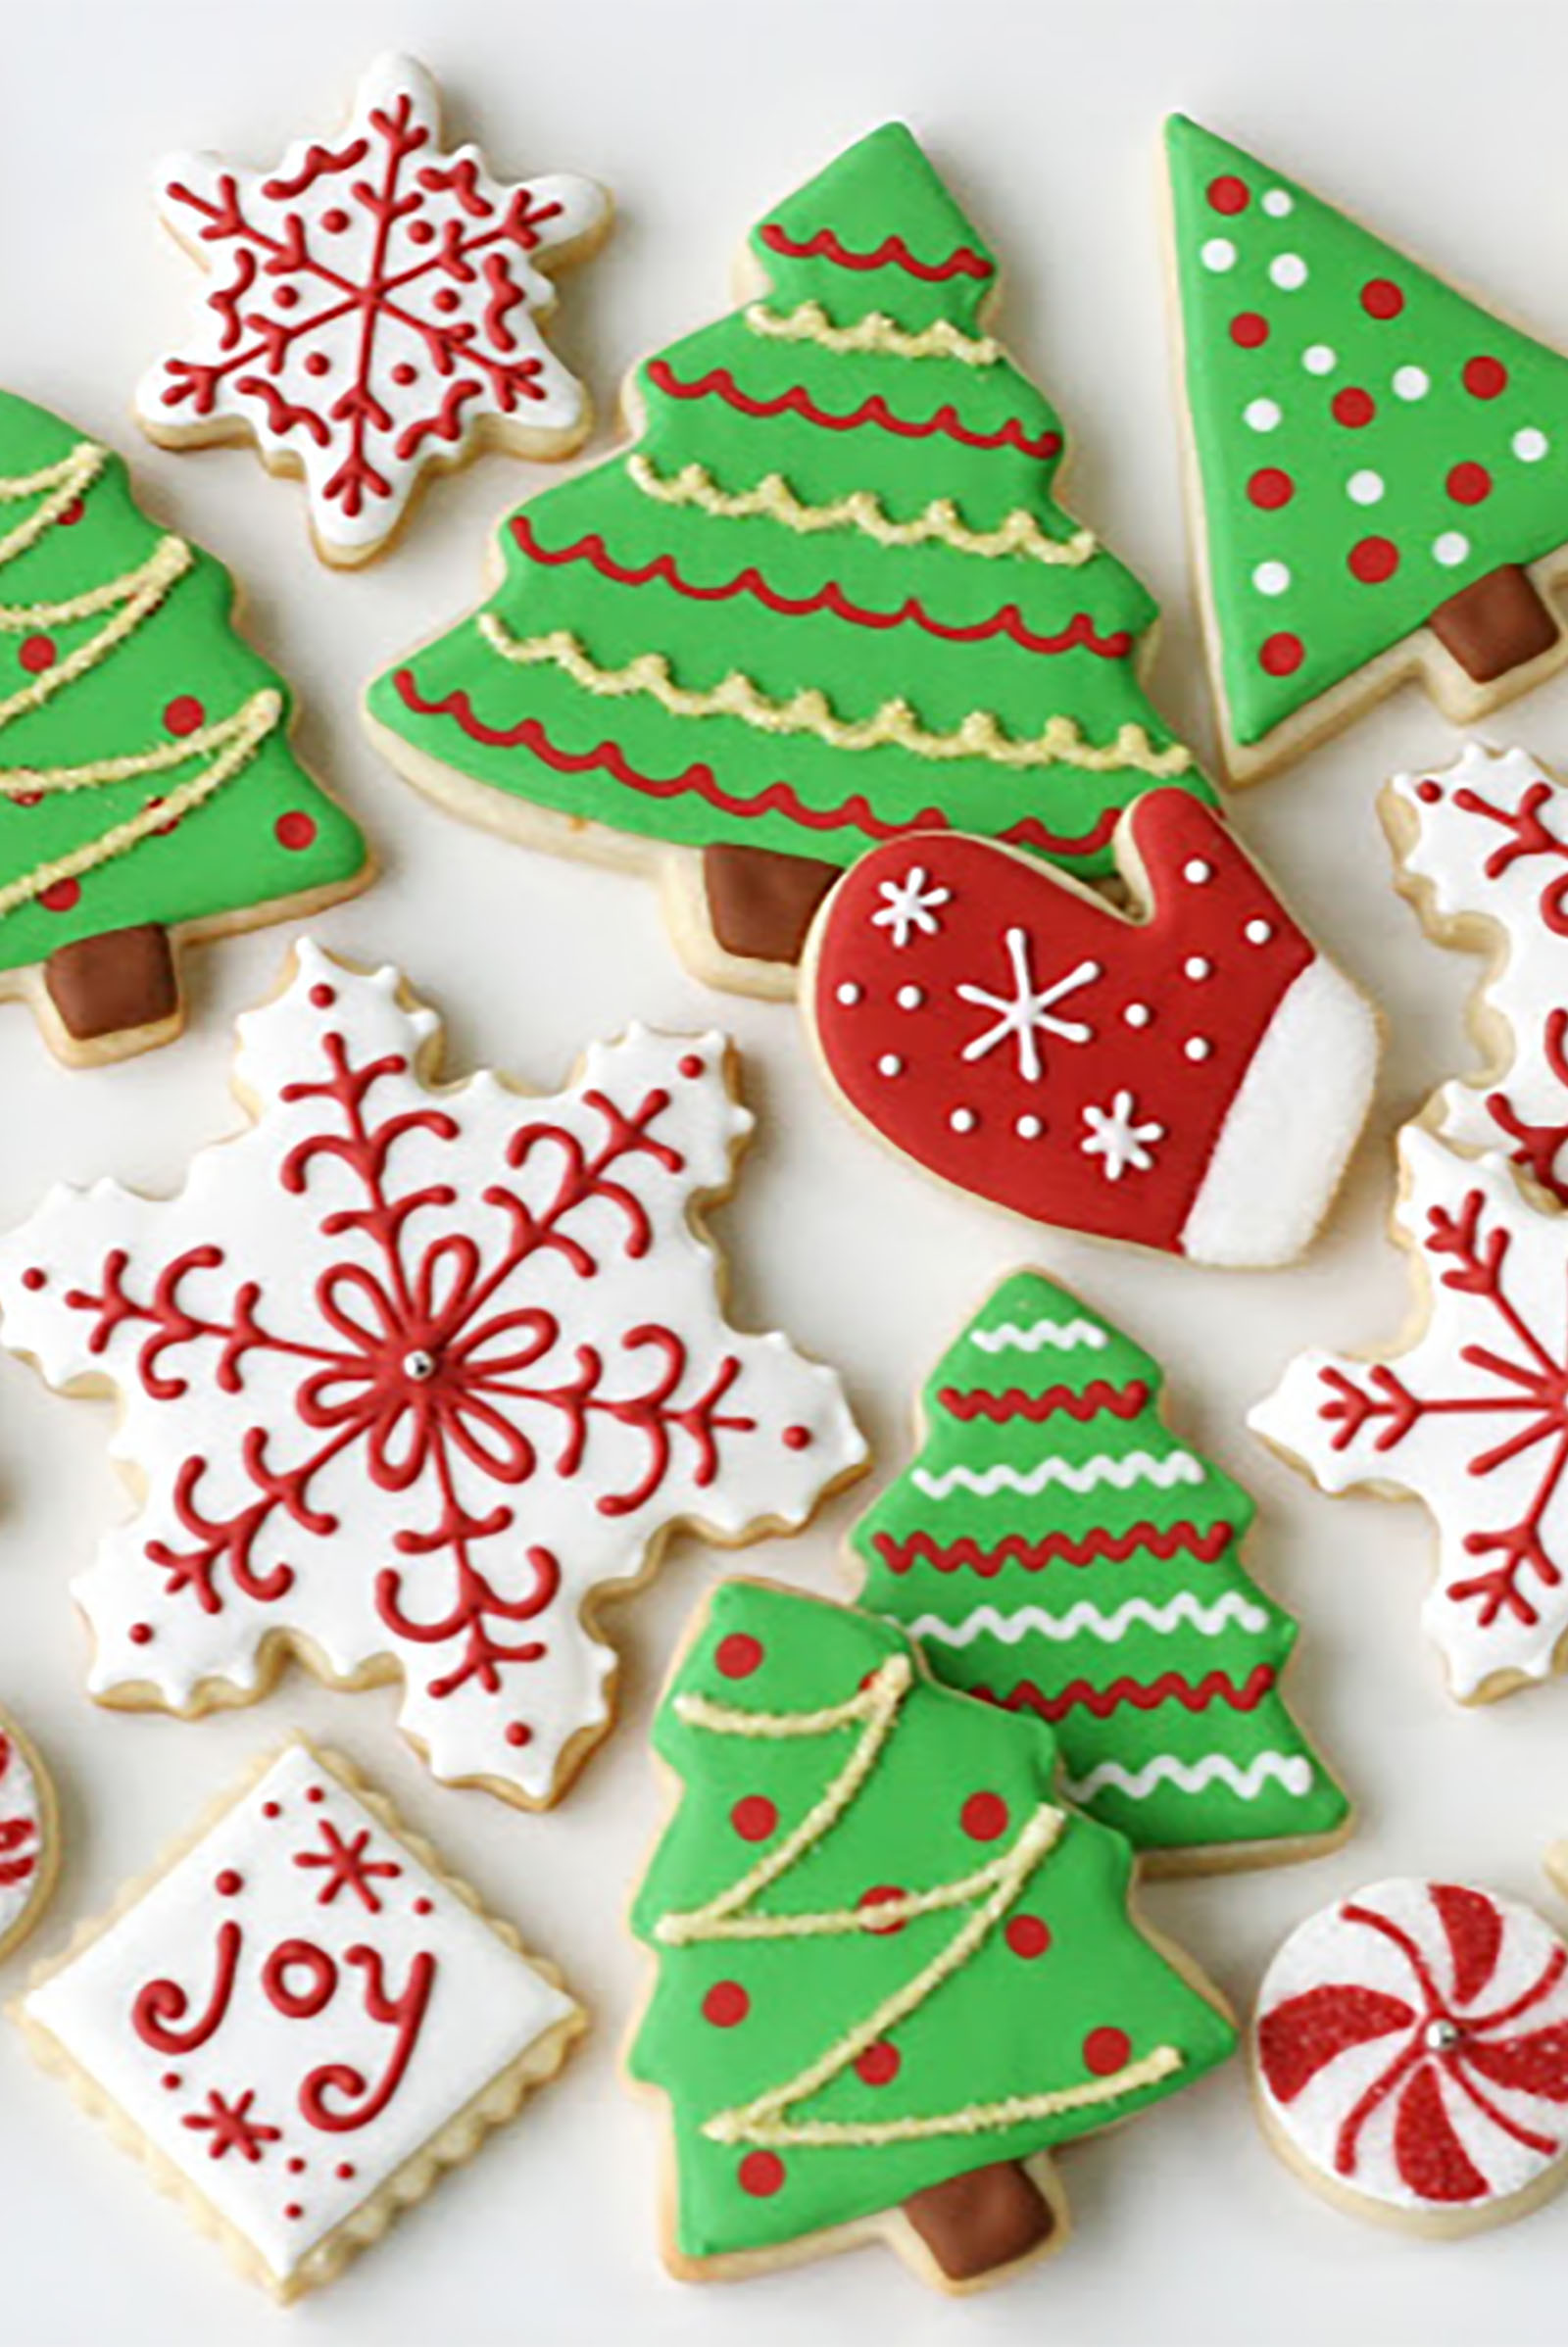 Decorate Christmas Cookies
 Ideas How To Decorate Christmas Cookies